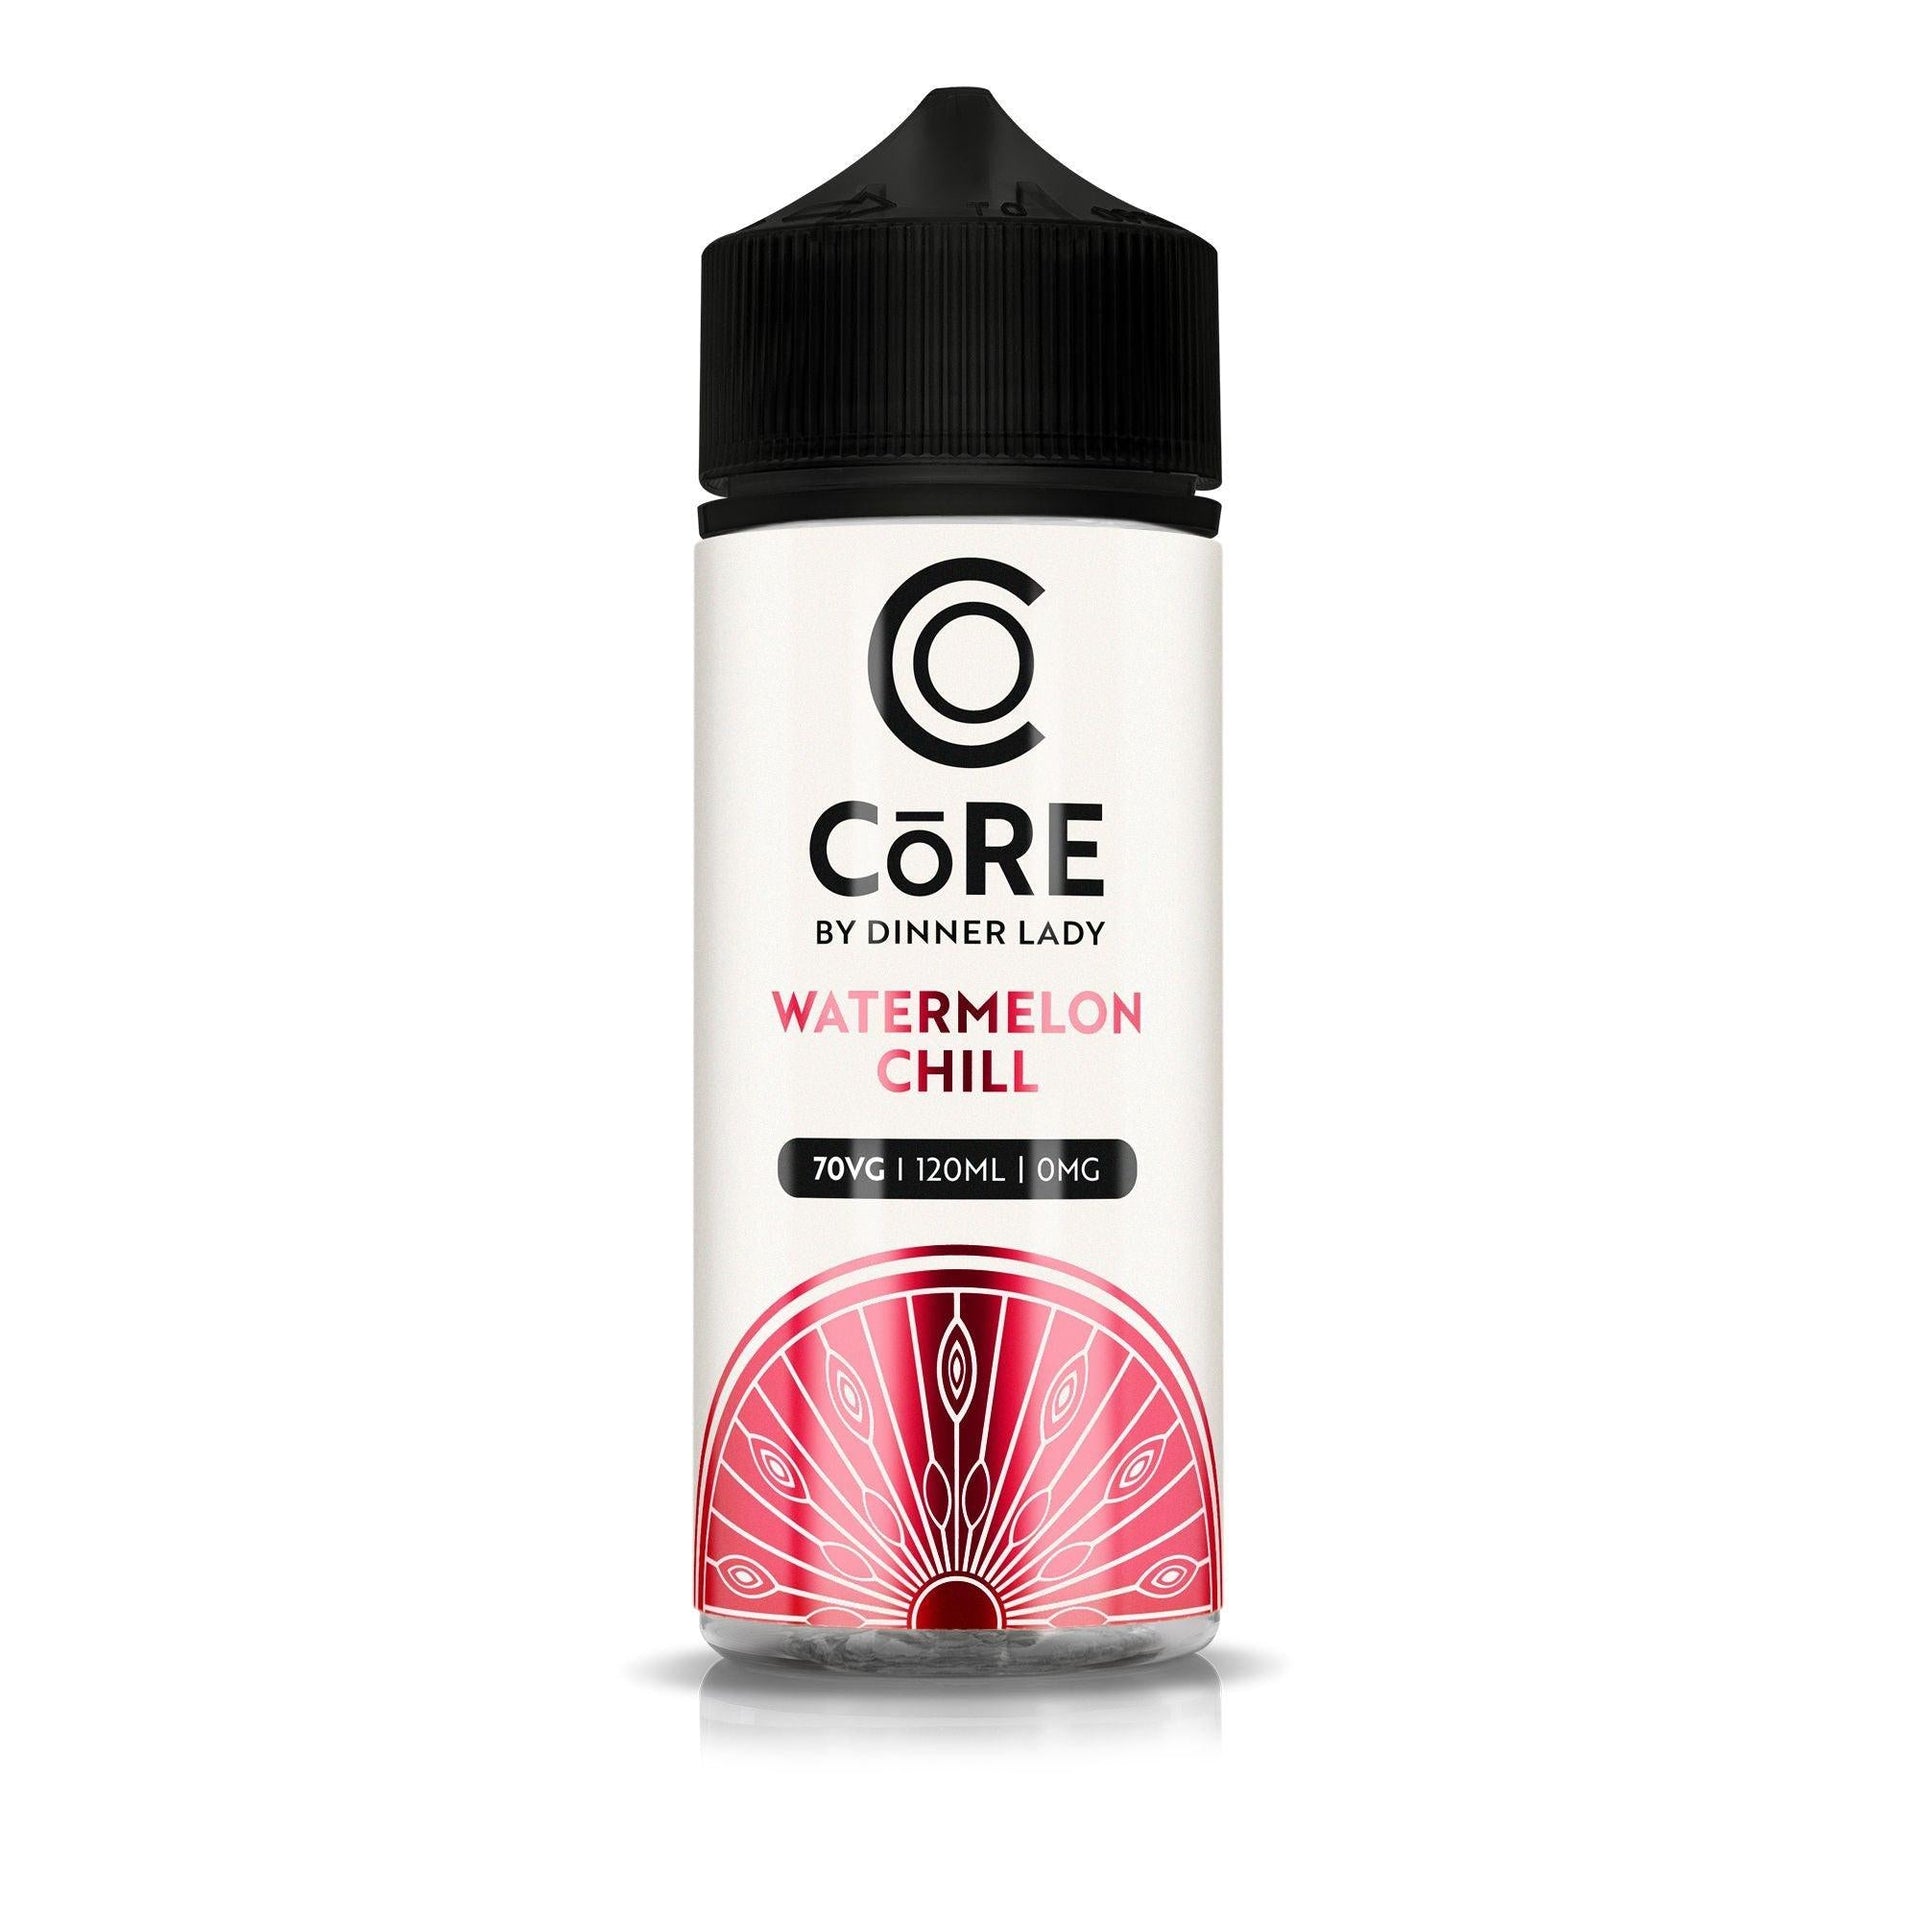 CORE by Dinner Lady - Watermelon Chill - The Vape Store